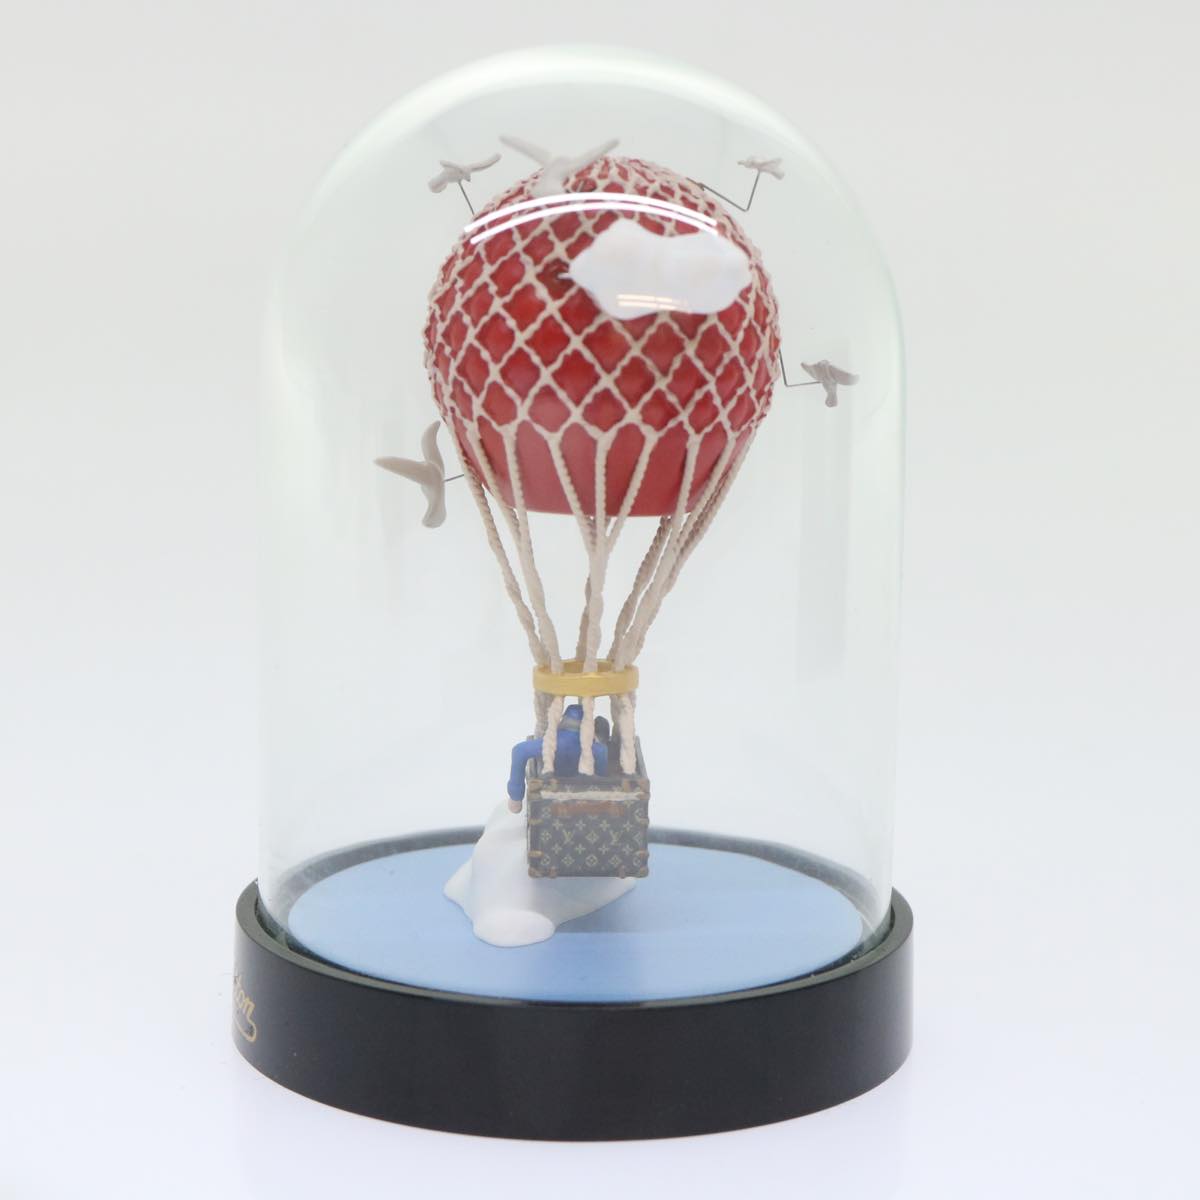 LOUIS VUITTON Snow Globe Balloon VIP Only Clear Red LV Auth 22321A